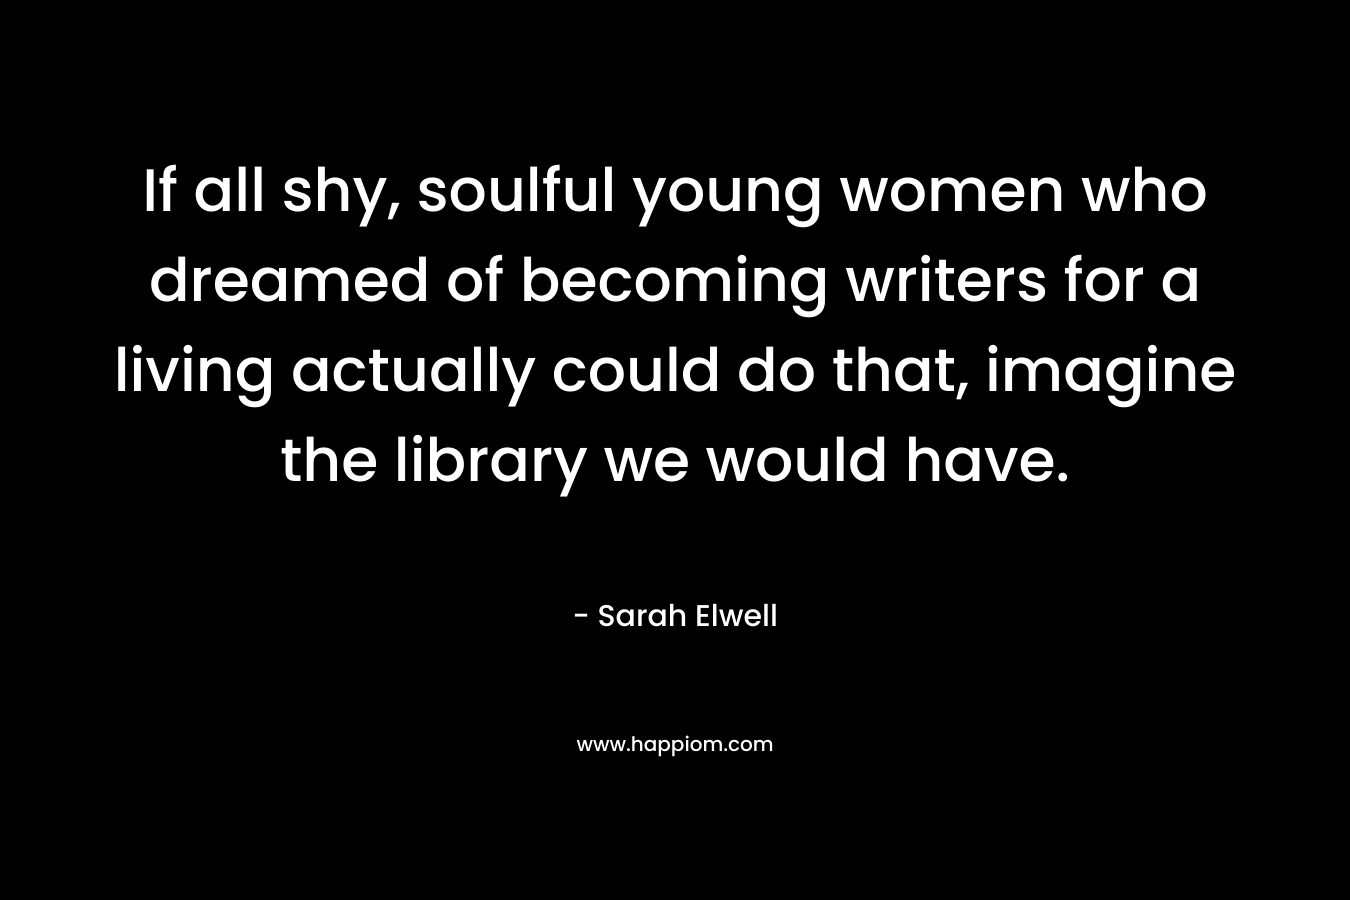 If all shy, soulful young women who dreamed of becoming writers for a living actually could do that, imagine the library we would have. – Sarah Elwell